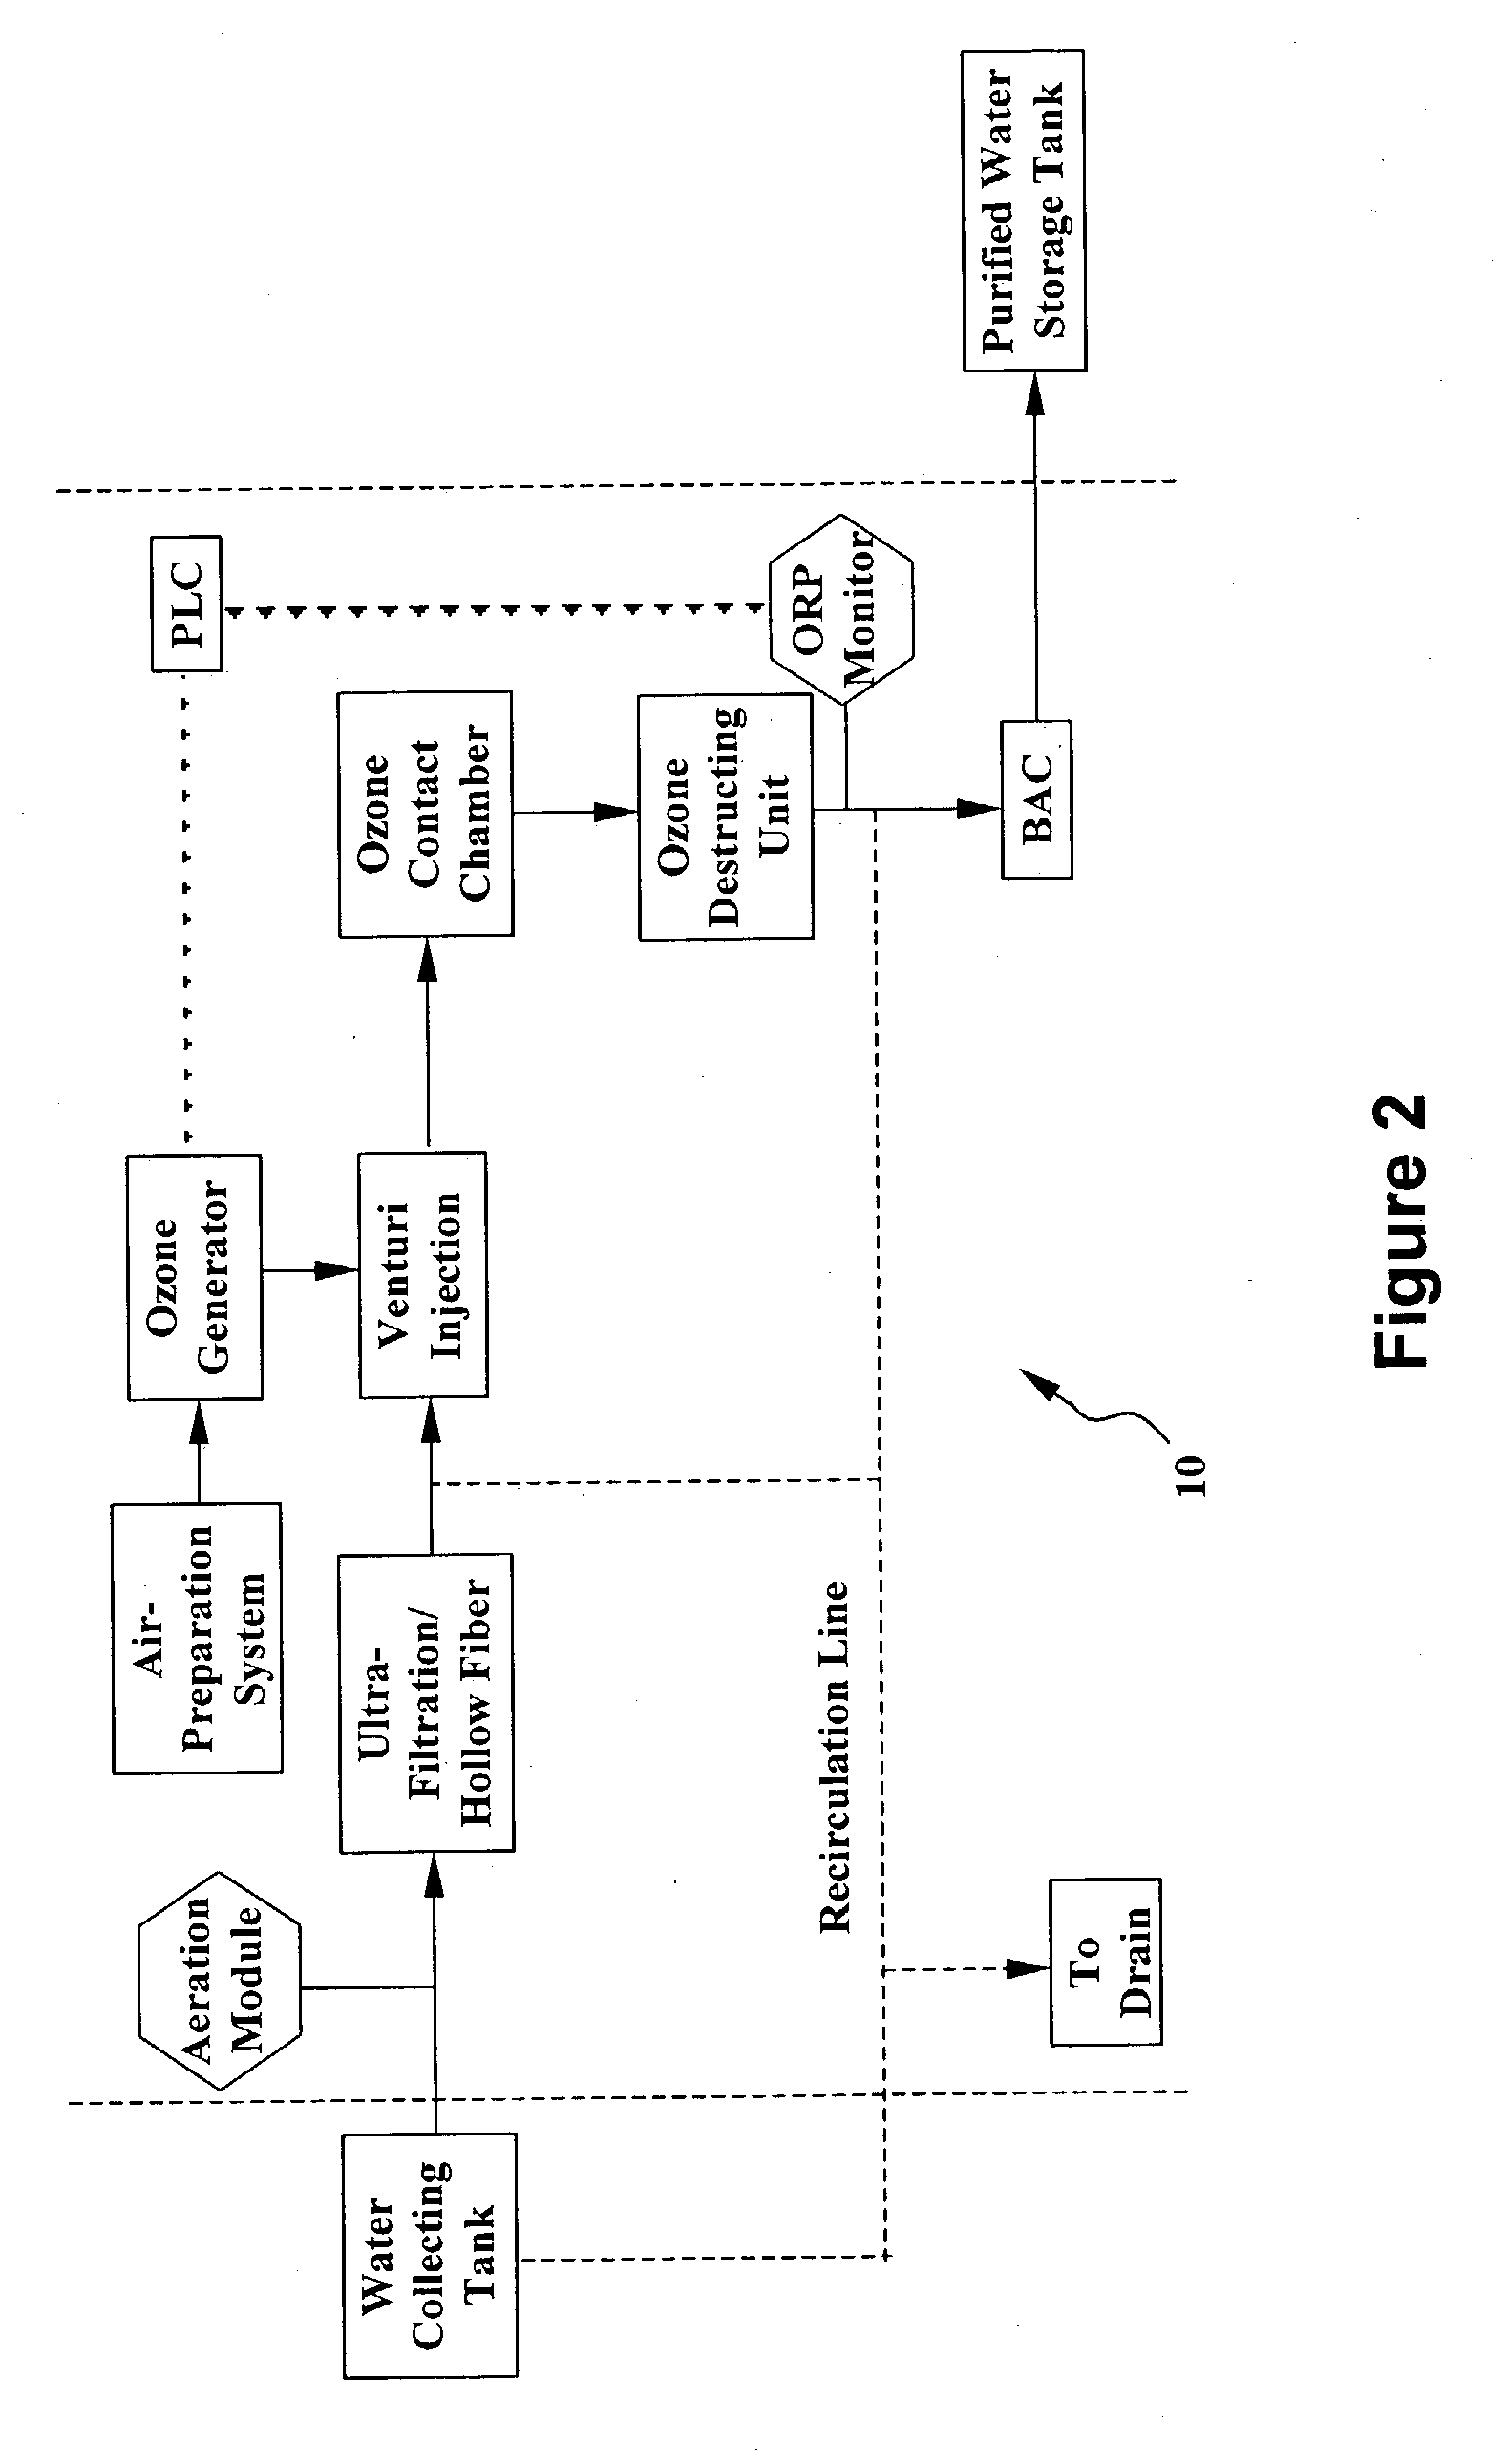 System and method for water purification